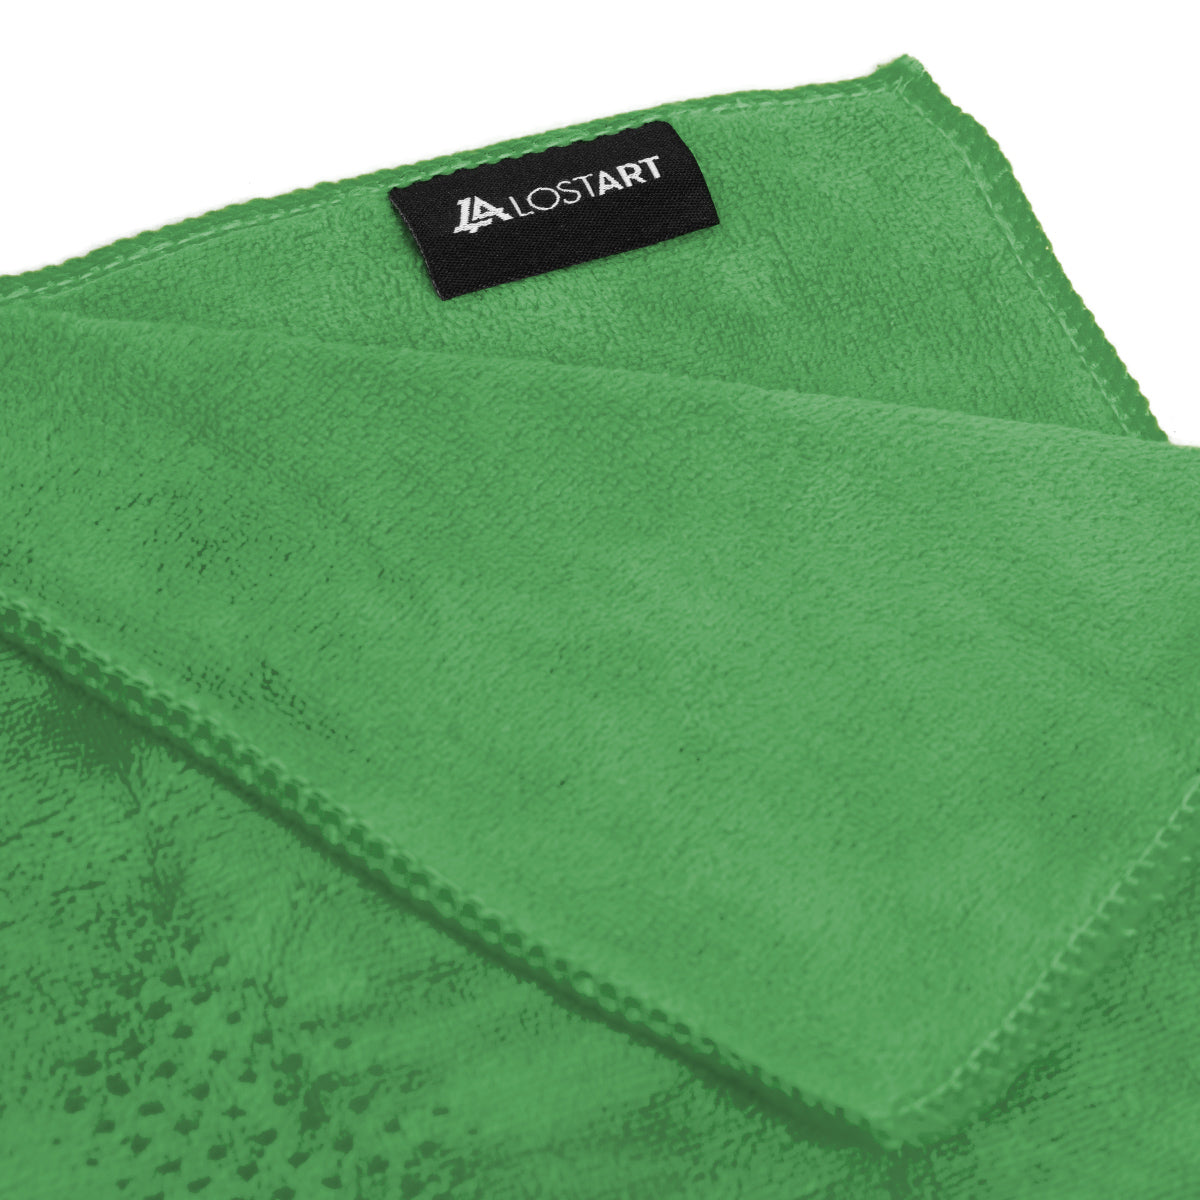 Lost Art Canada - green rink rag hand towel folded view